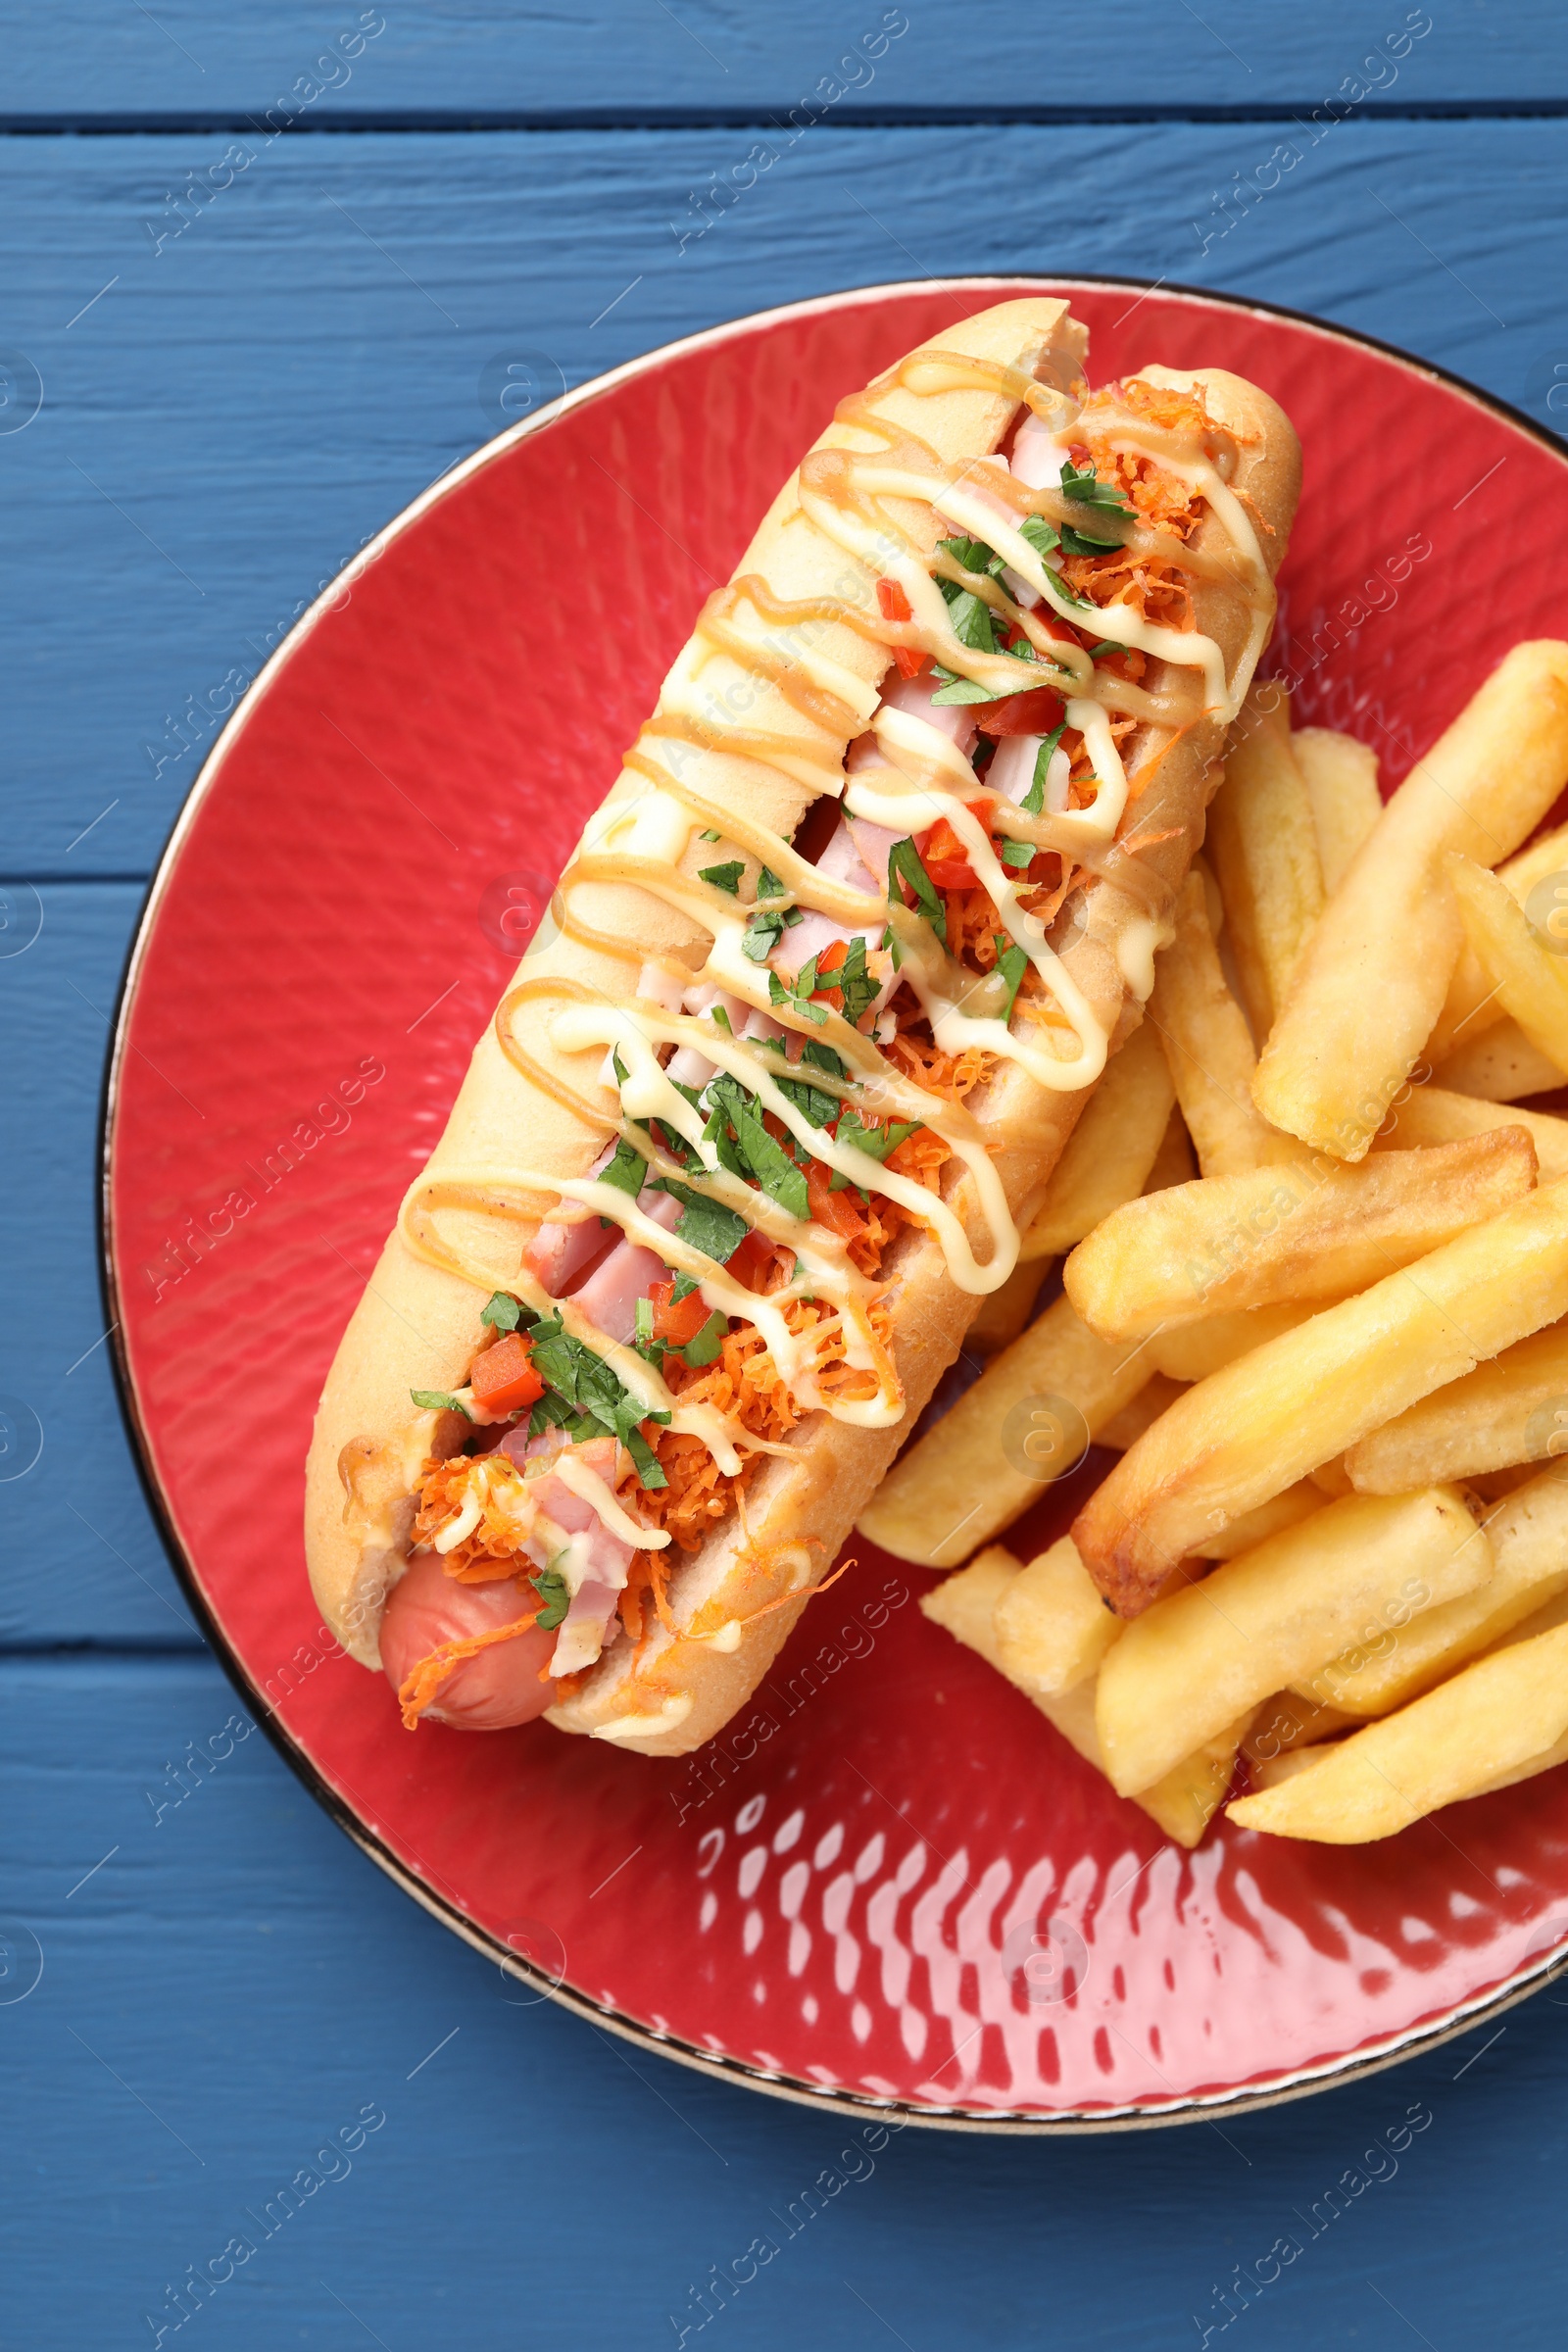 Photo of Delicious hot dog with bacon, carrot, parsley and french fries on blue wooden table, top view